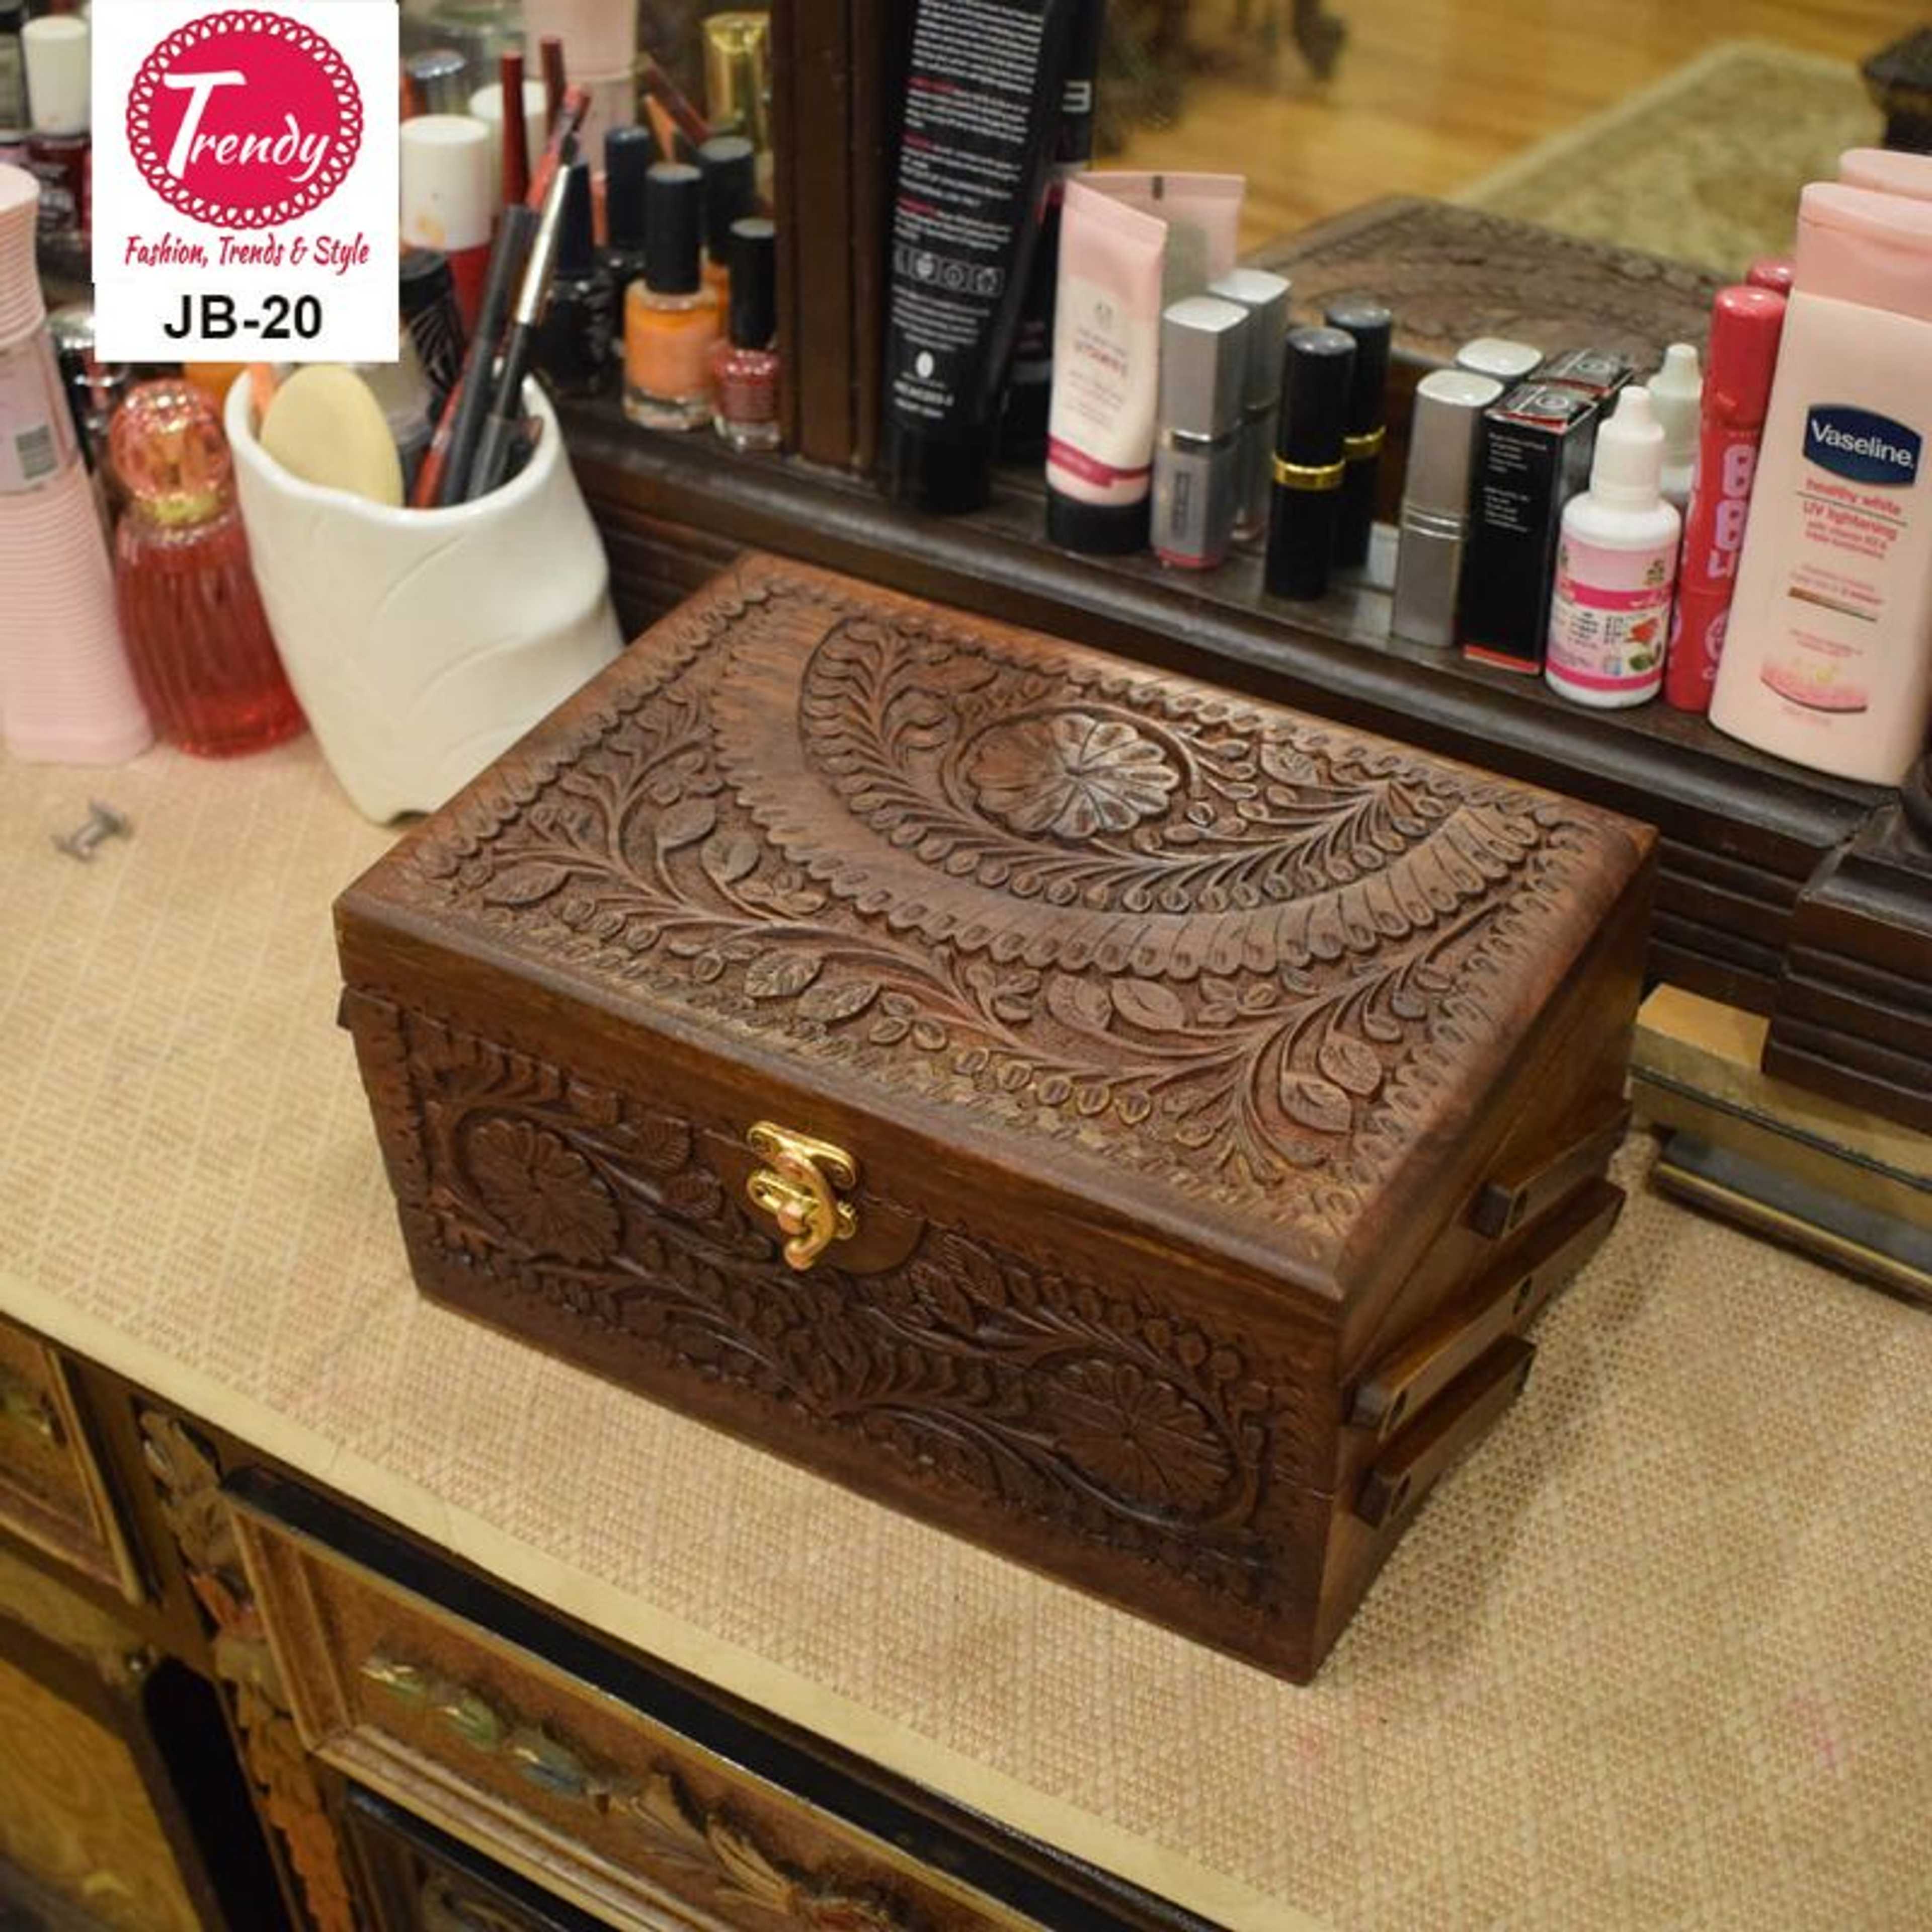 Hand Crafted Jewelry Organizer With Carving Art JB-20